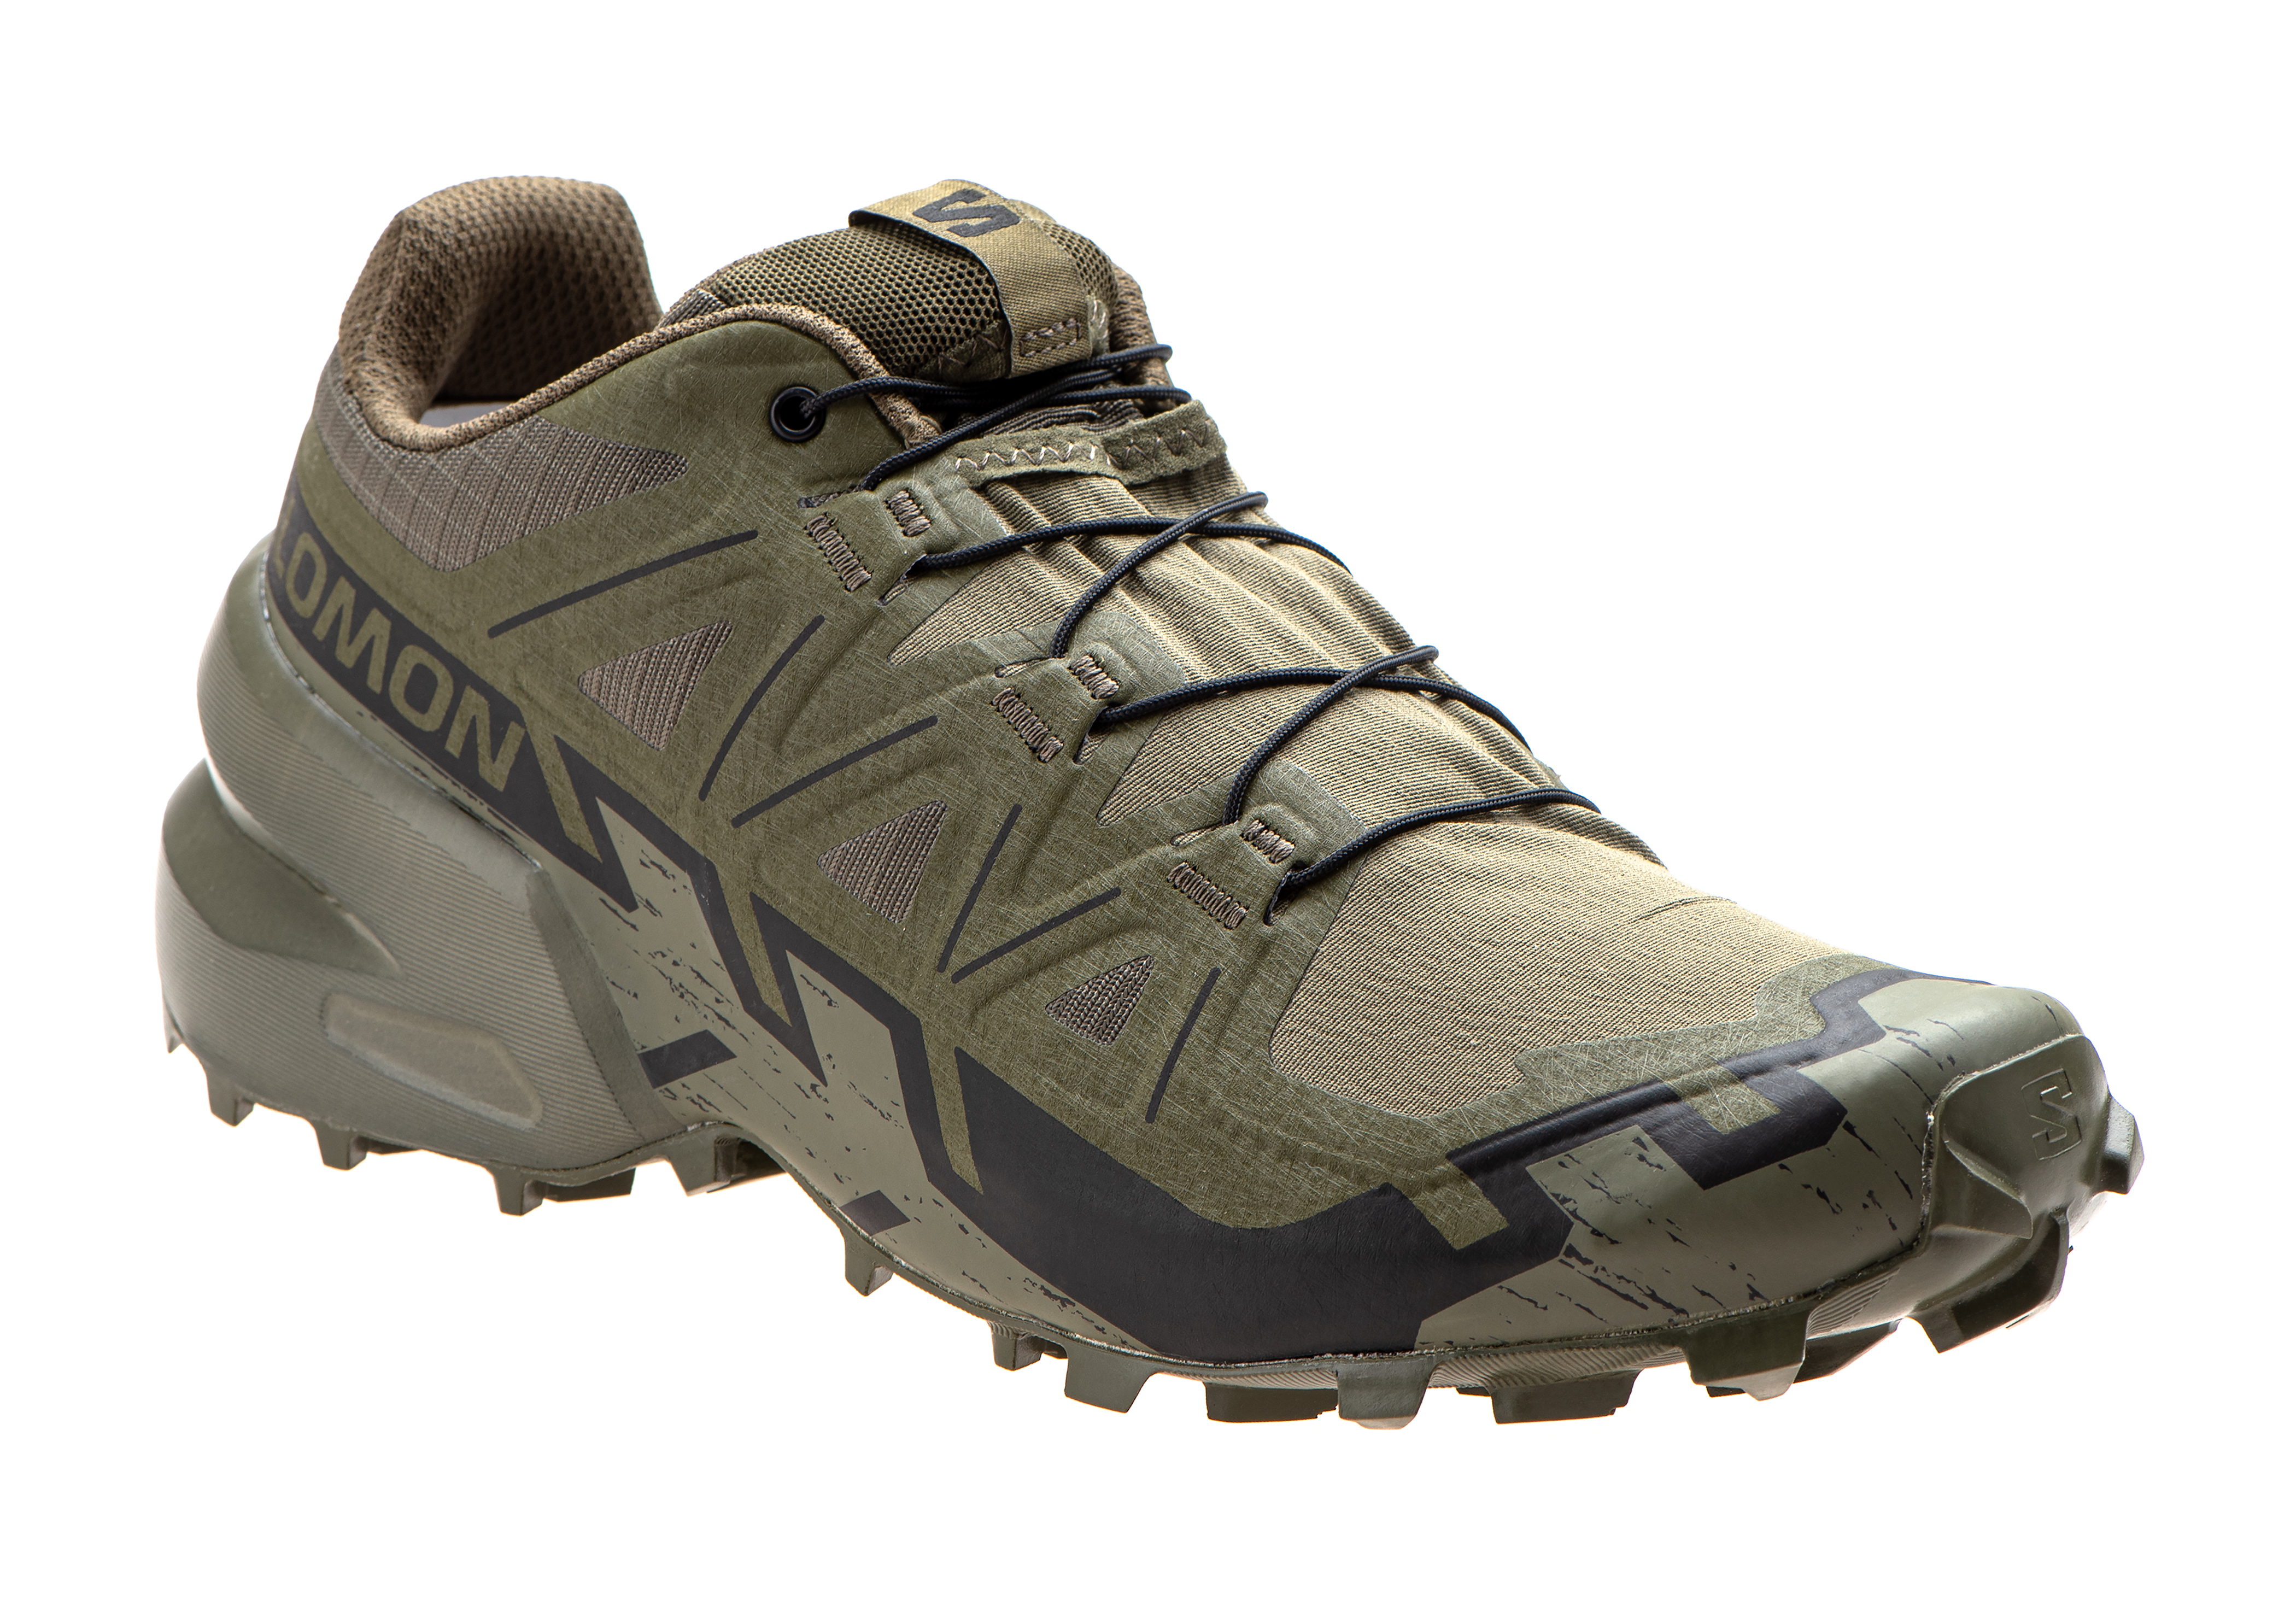 Salomon Speedcross 6 FORCES Shoes – Offbase Supply Co.